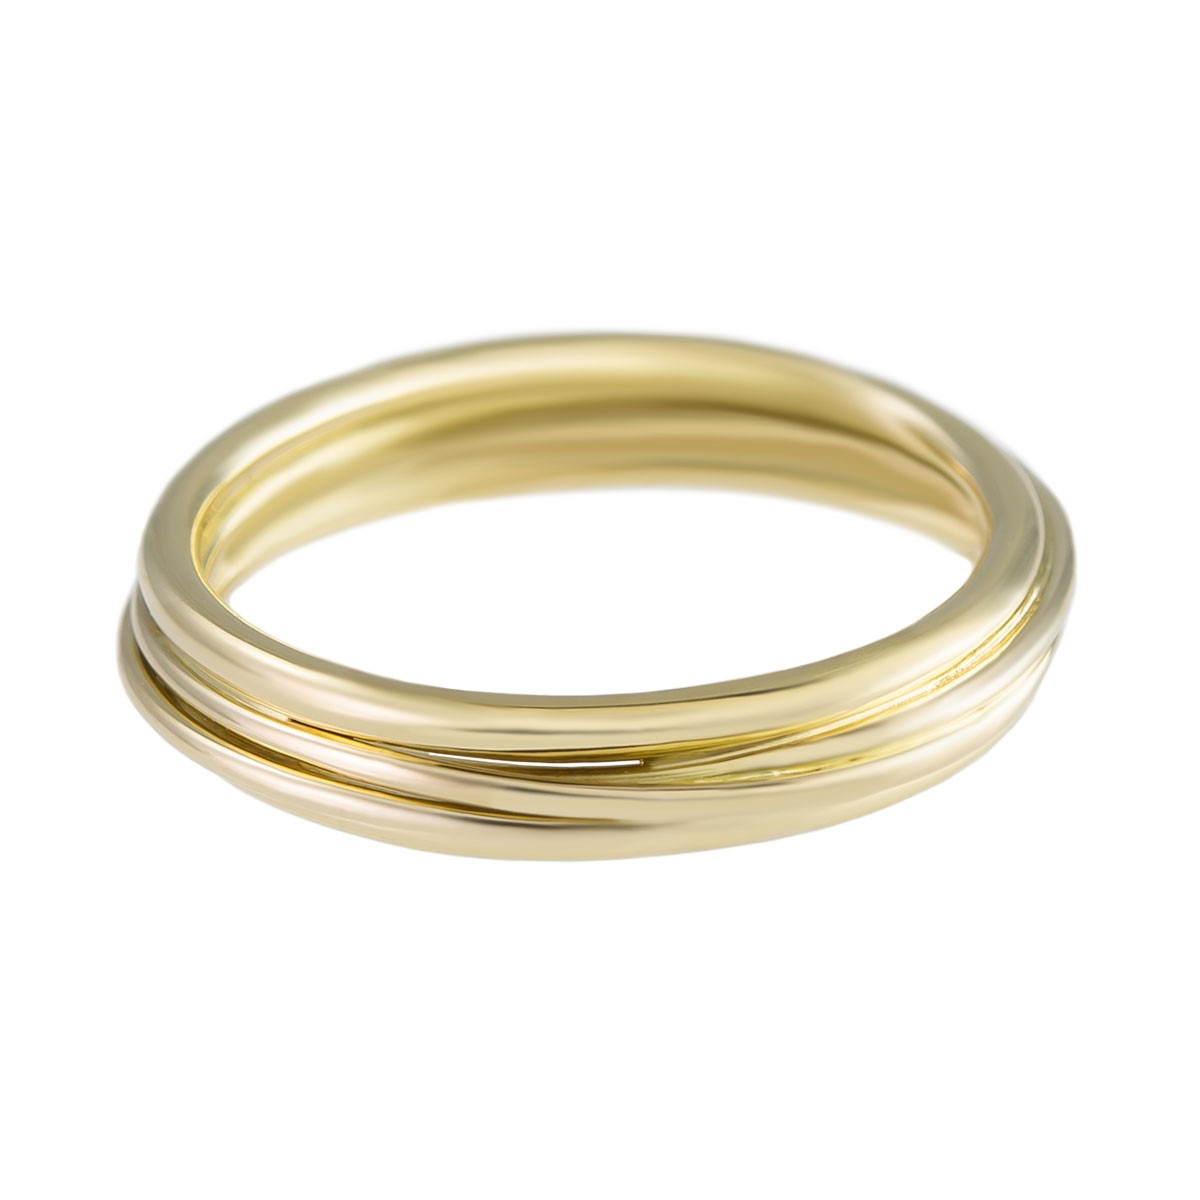 Yen, 18ct Yellow Gold Wrapped Wire Wedding Ring, Tomfoolery